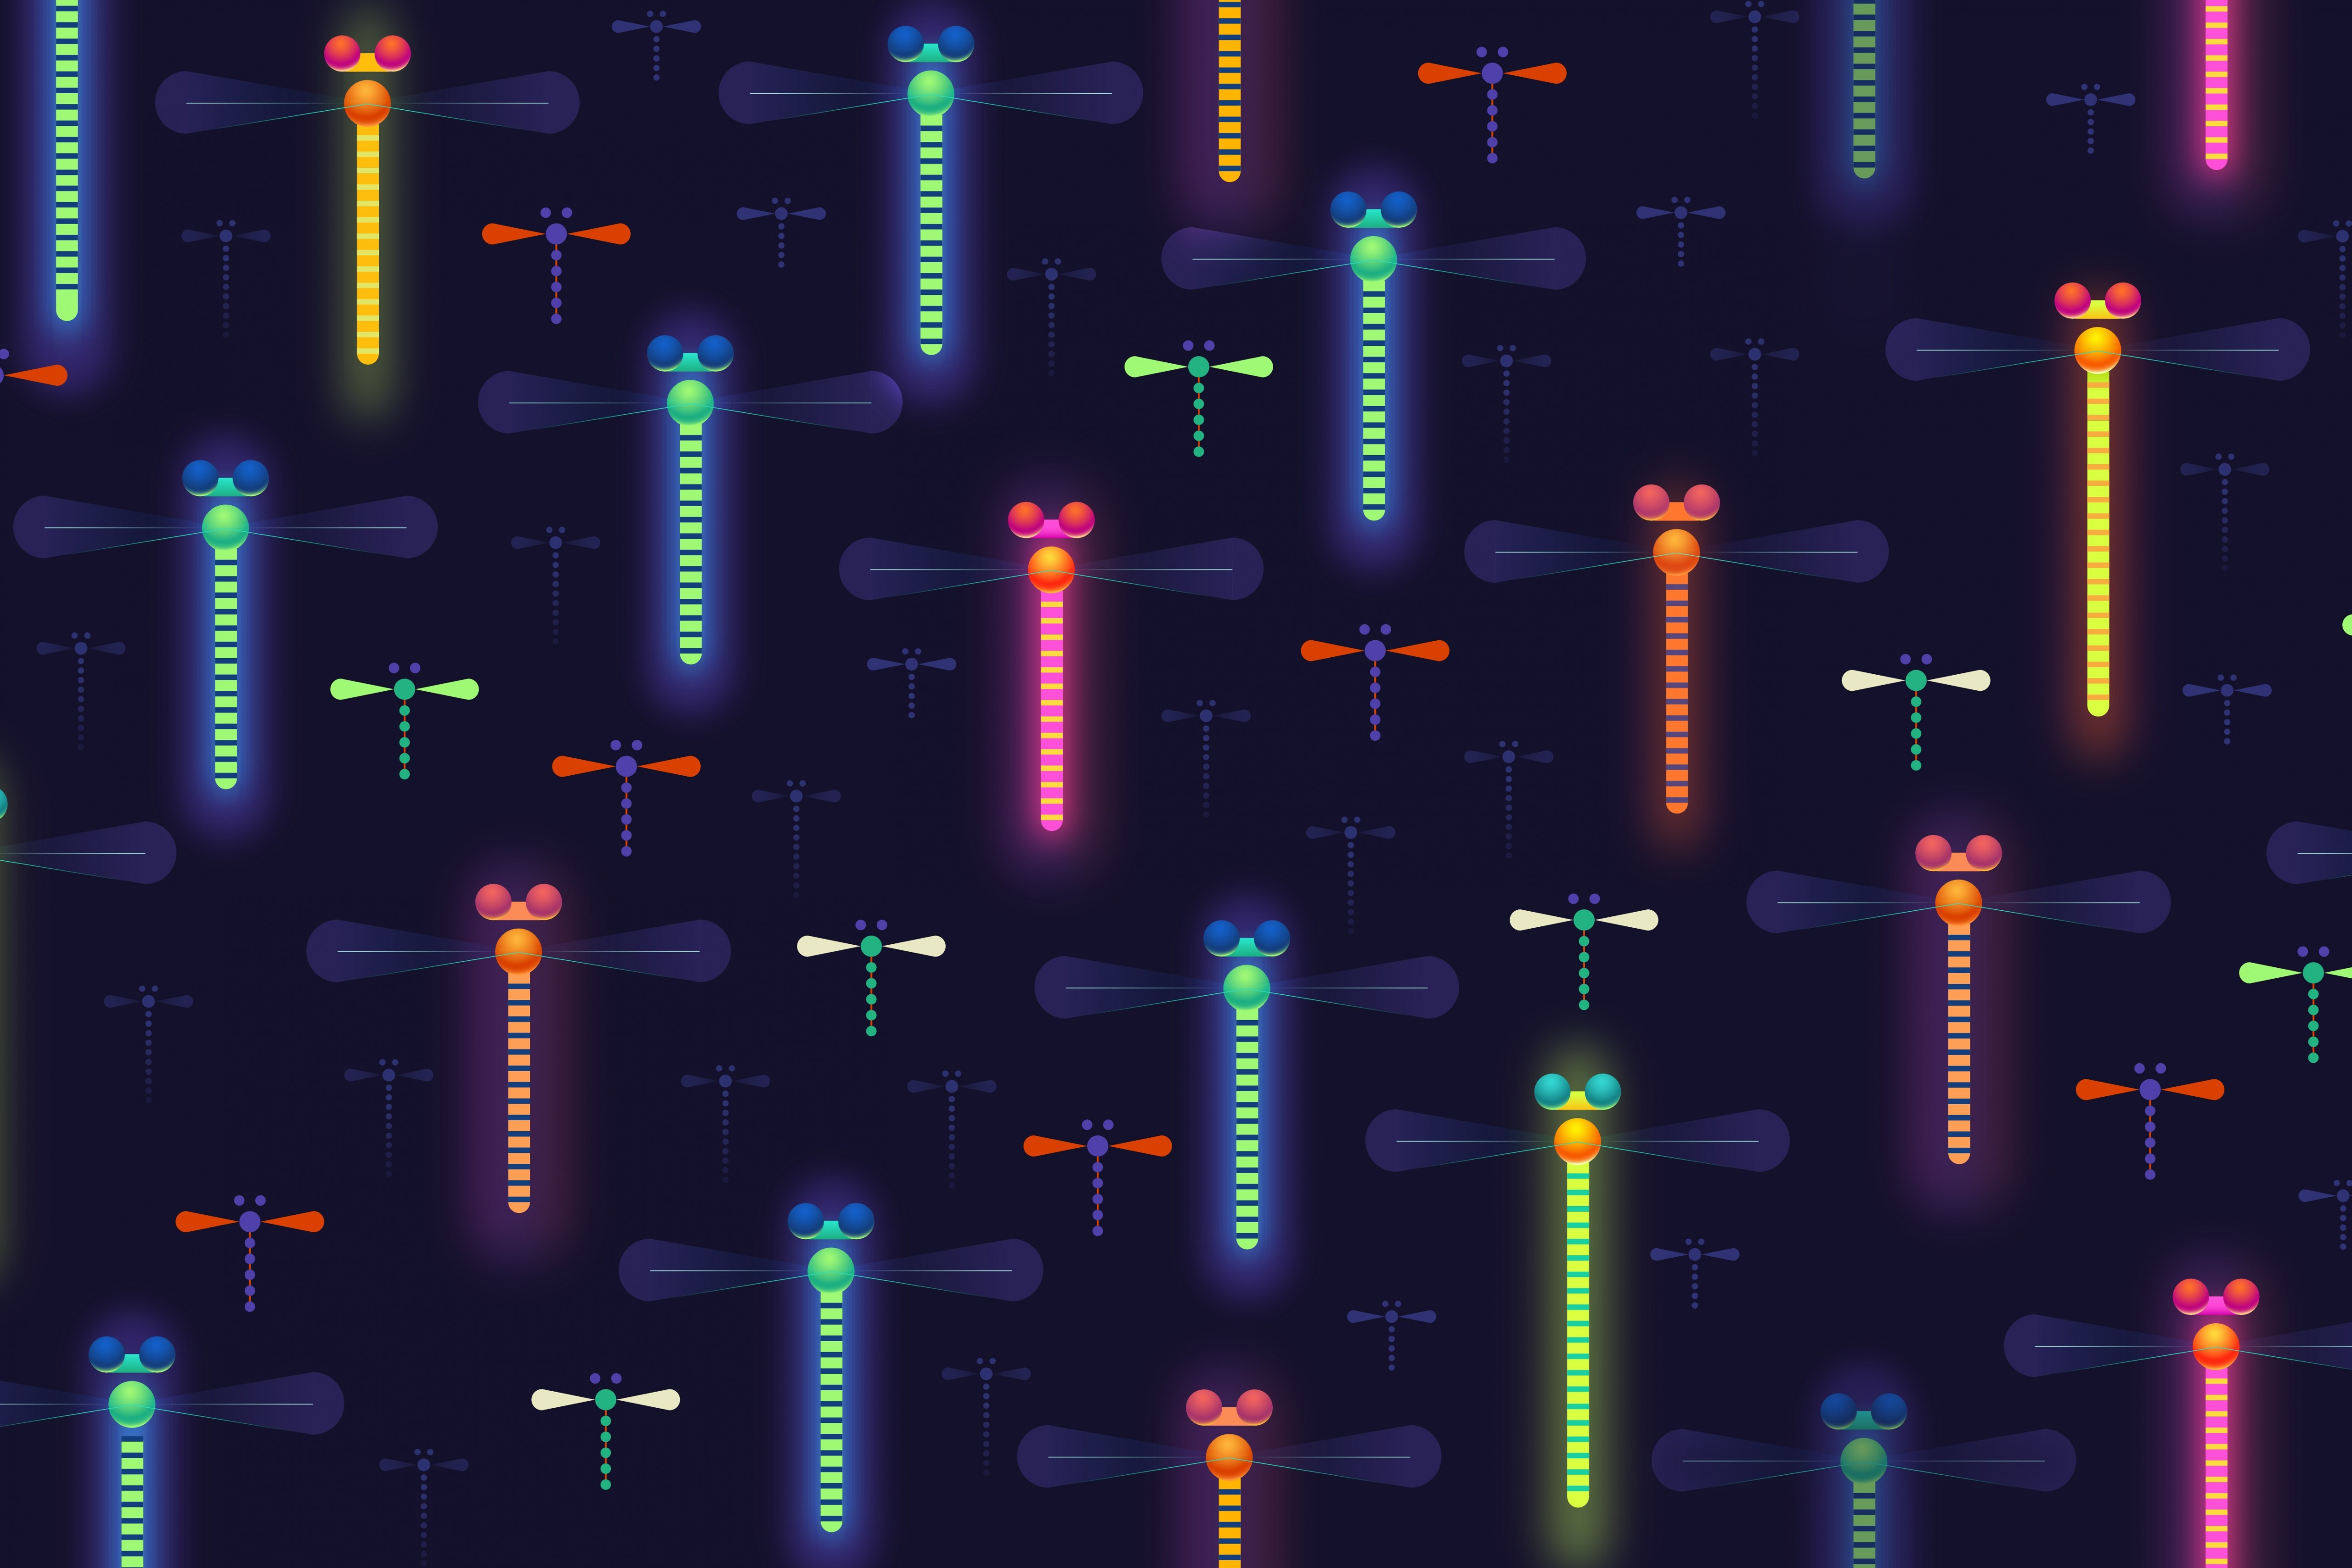 Download 5121x3414 Minimal Bugs, Colorful Neon Lights Wallpaper